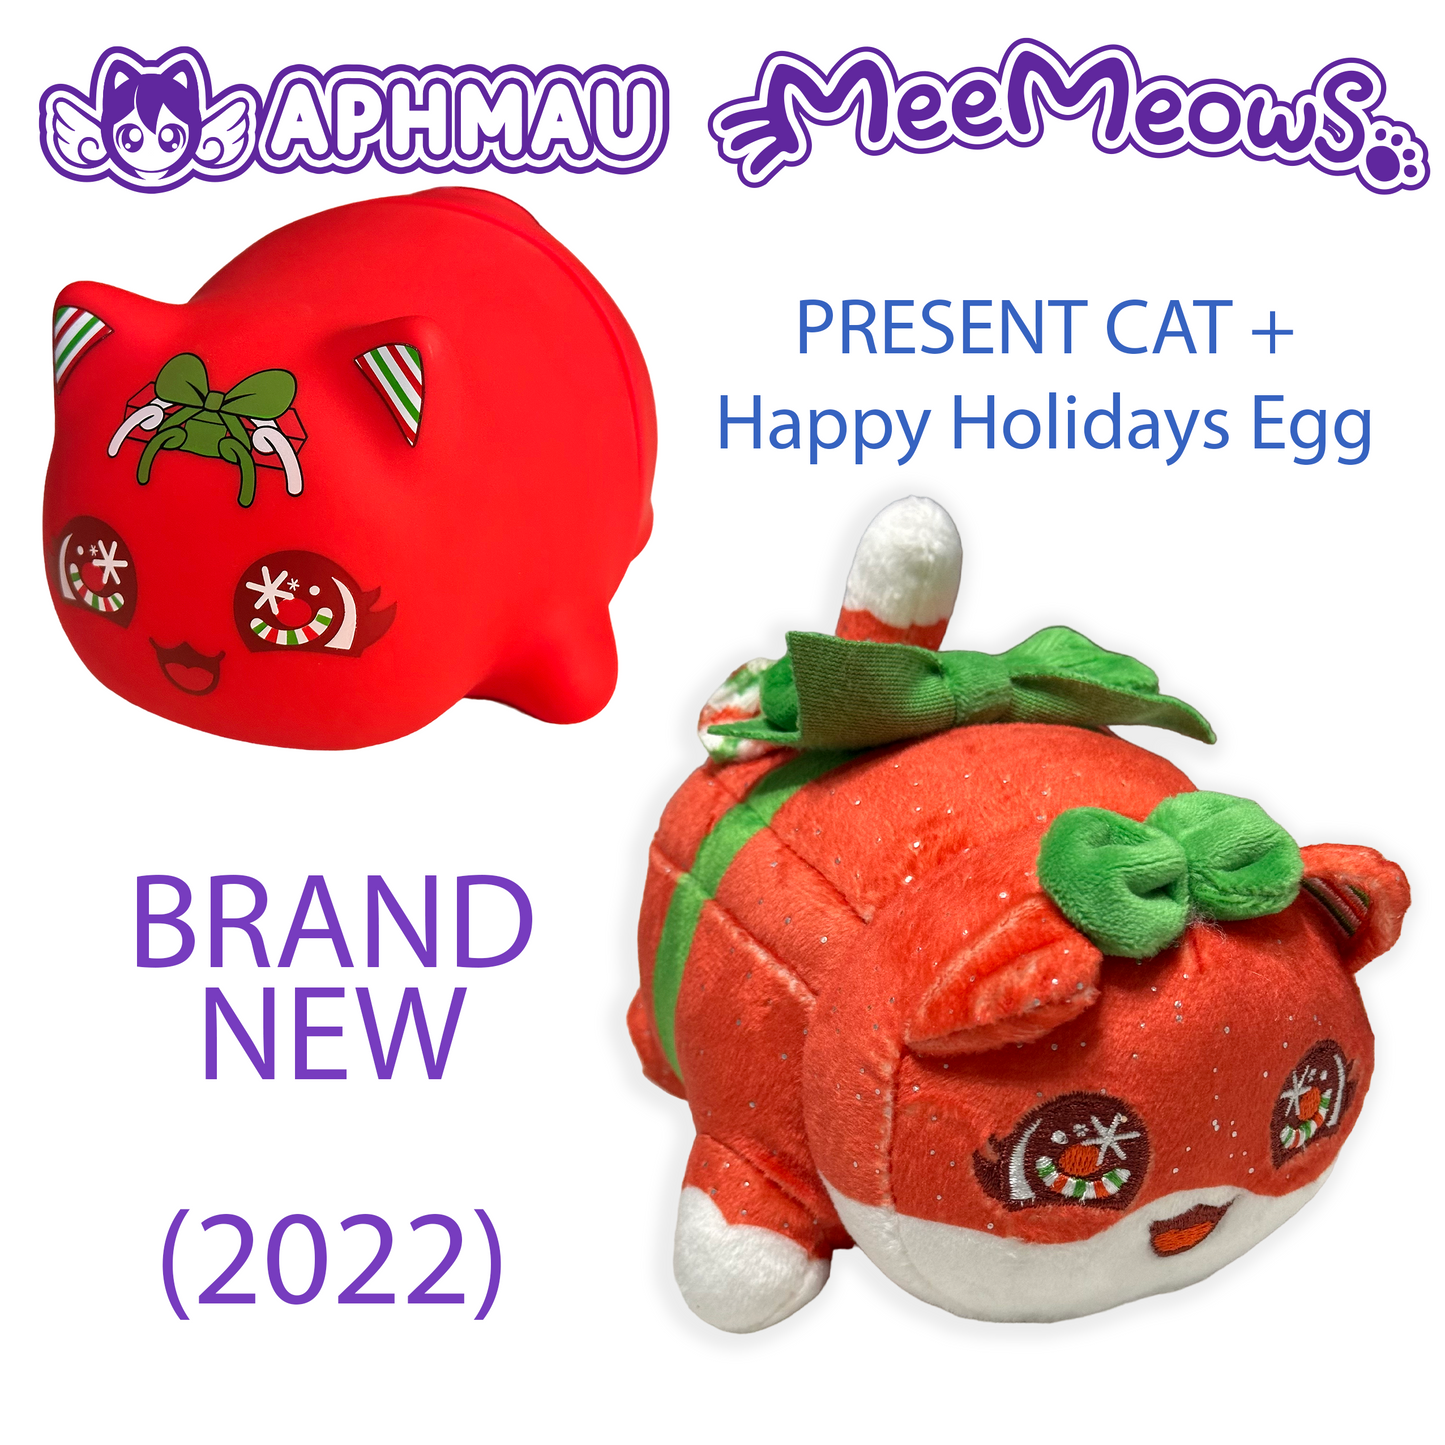 PRESENT CAT - MeeMeows HAPPY HOLIDAYS EGG from Aphmau (NEW) RARE Christmas Plush